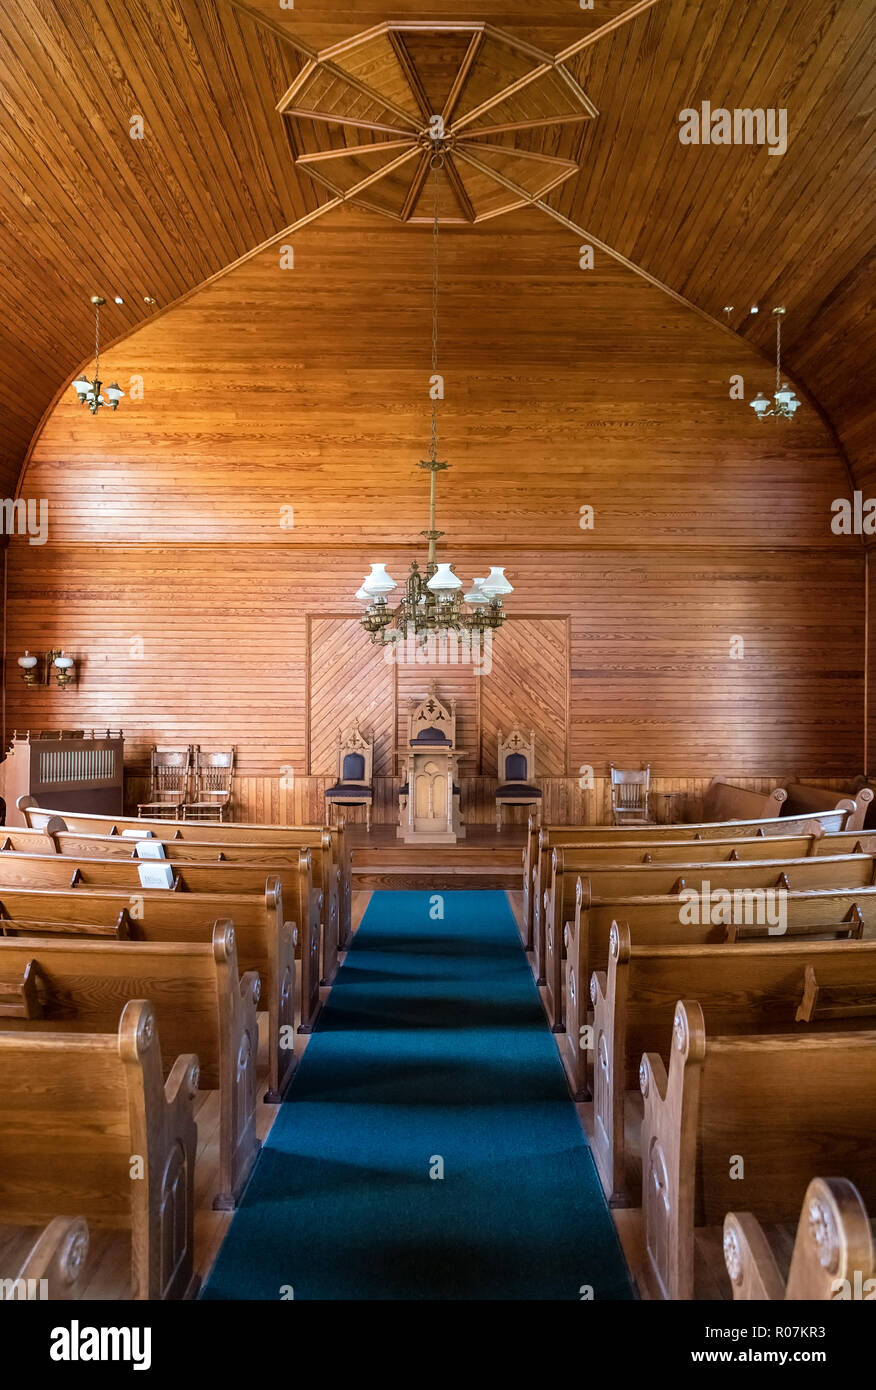 Interior of Union Christian Church located within the Calvin Coolidge Homestead District, Plymouth Notch, Vermont, USA. Stock Photo